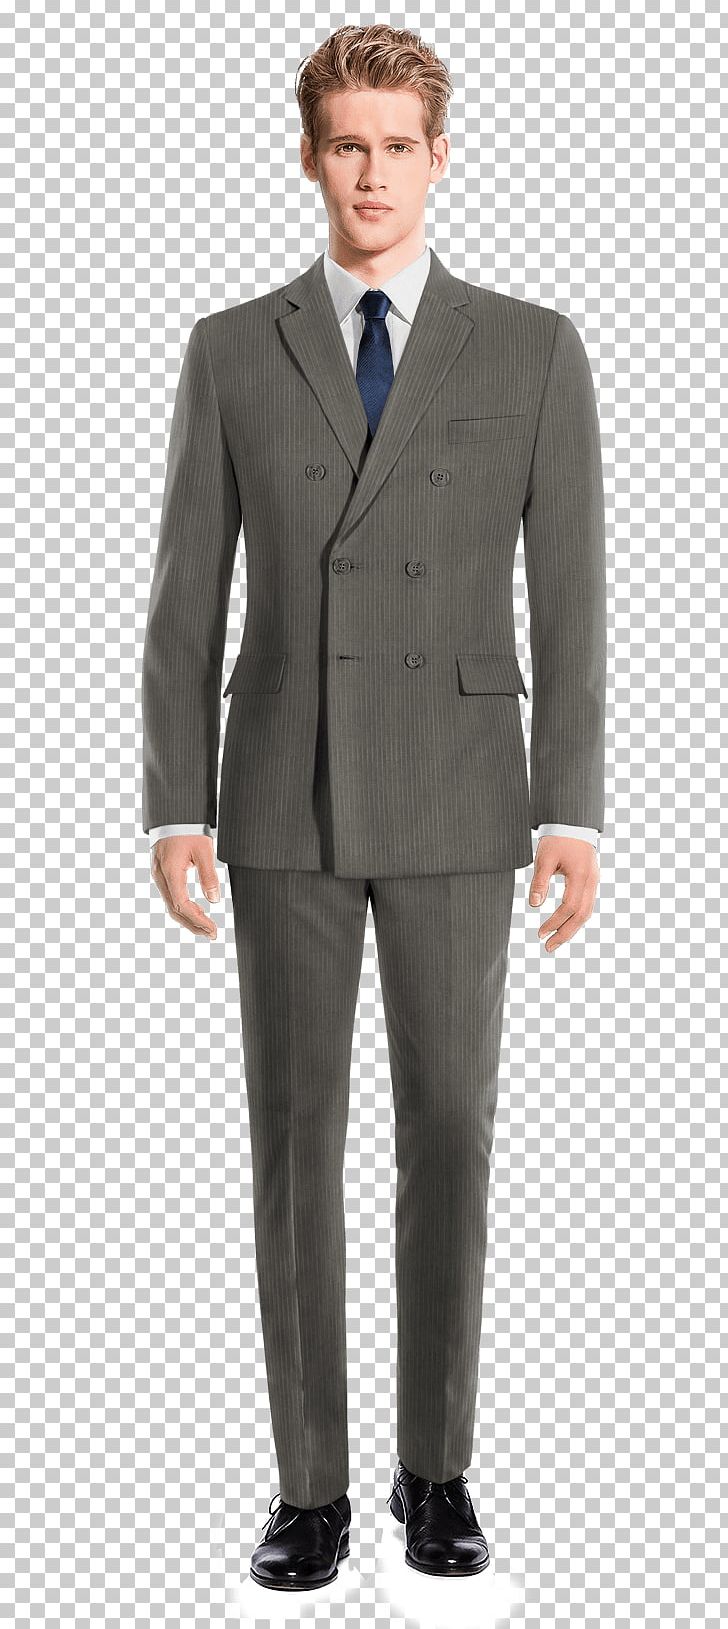 Suit Tuxedo Double-breasted Tweed Black Tie PNG, Clipart, Black Tie, Blazer, Business, Businessperson, Clothing Free PNG Download